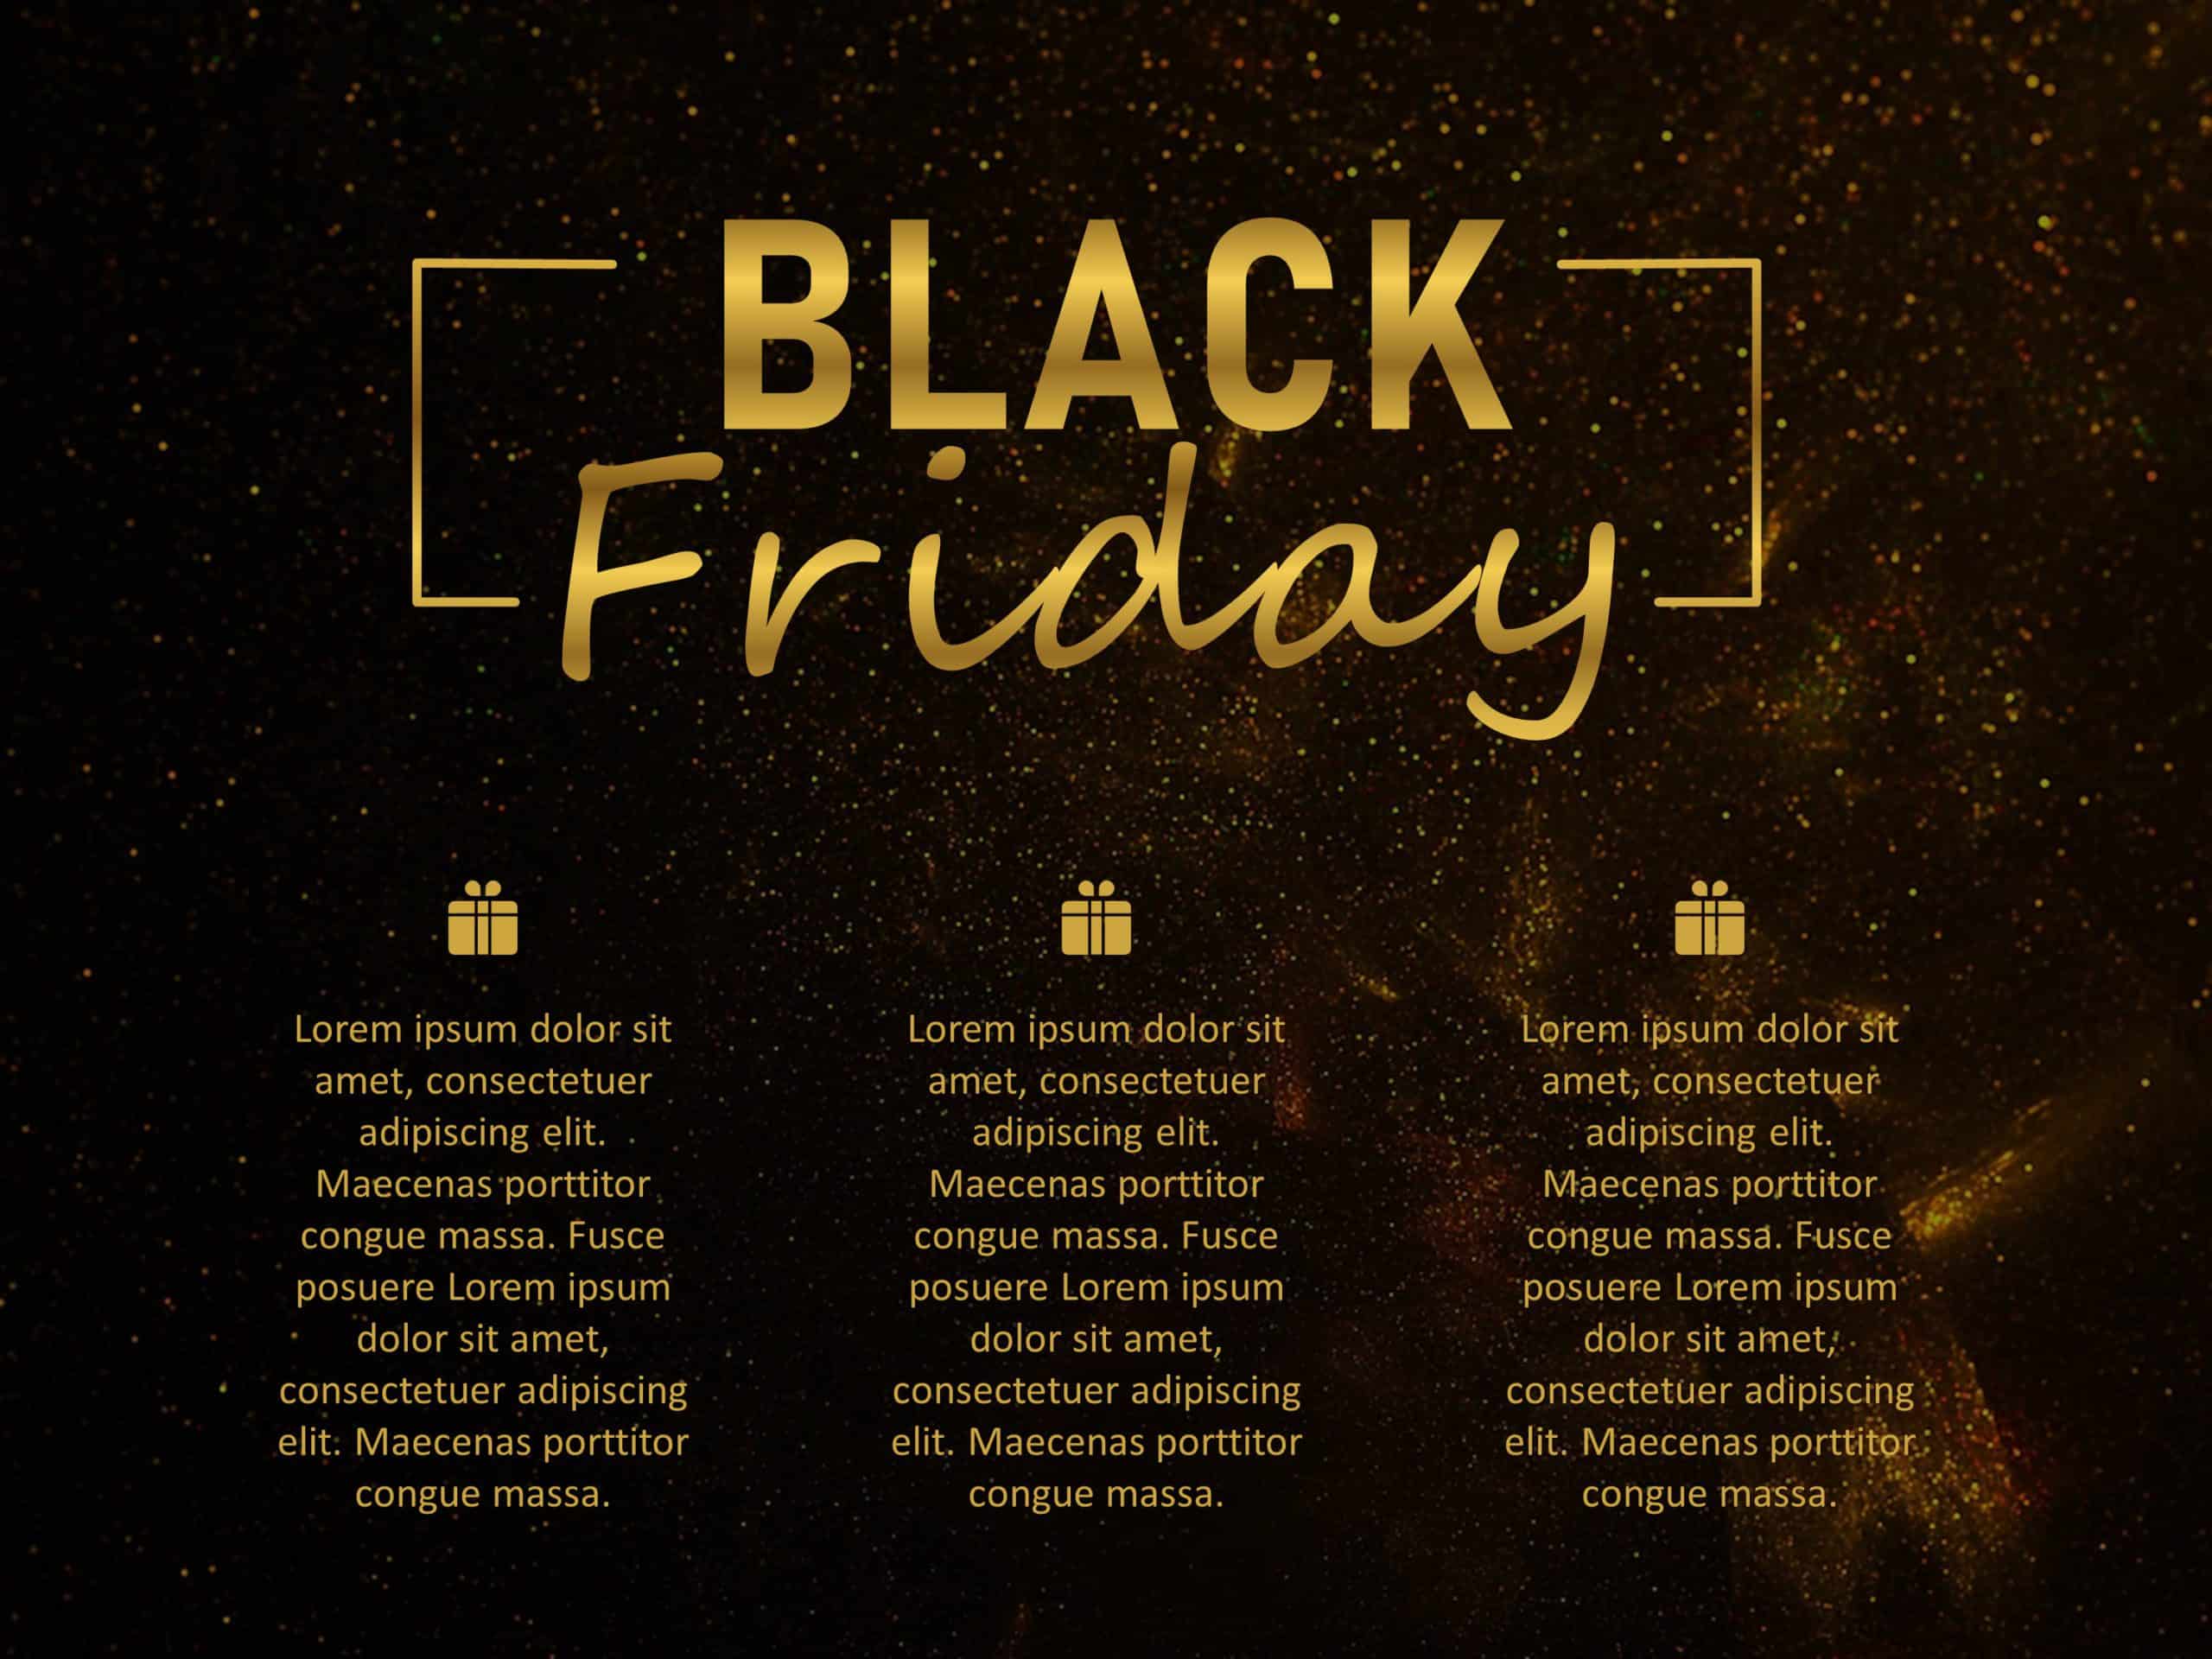 Black Friday Special PowerPoint Template